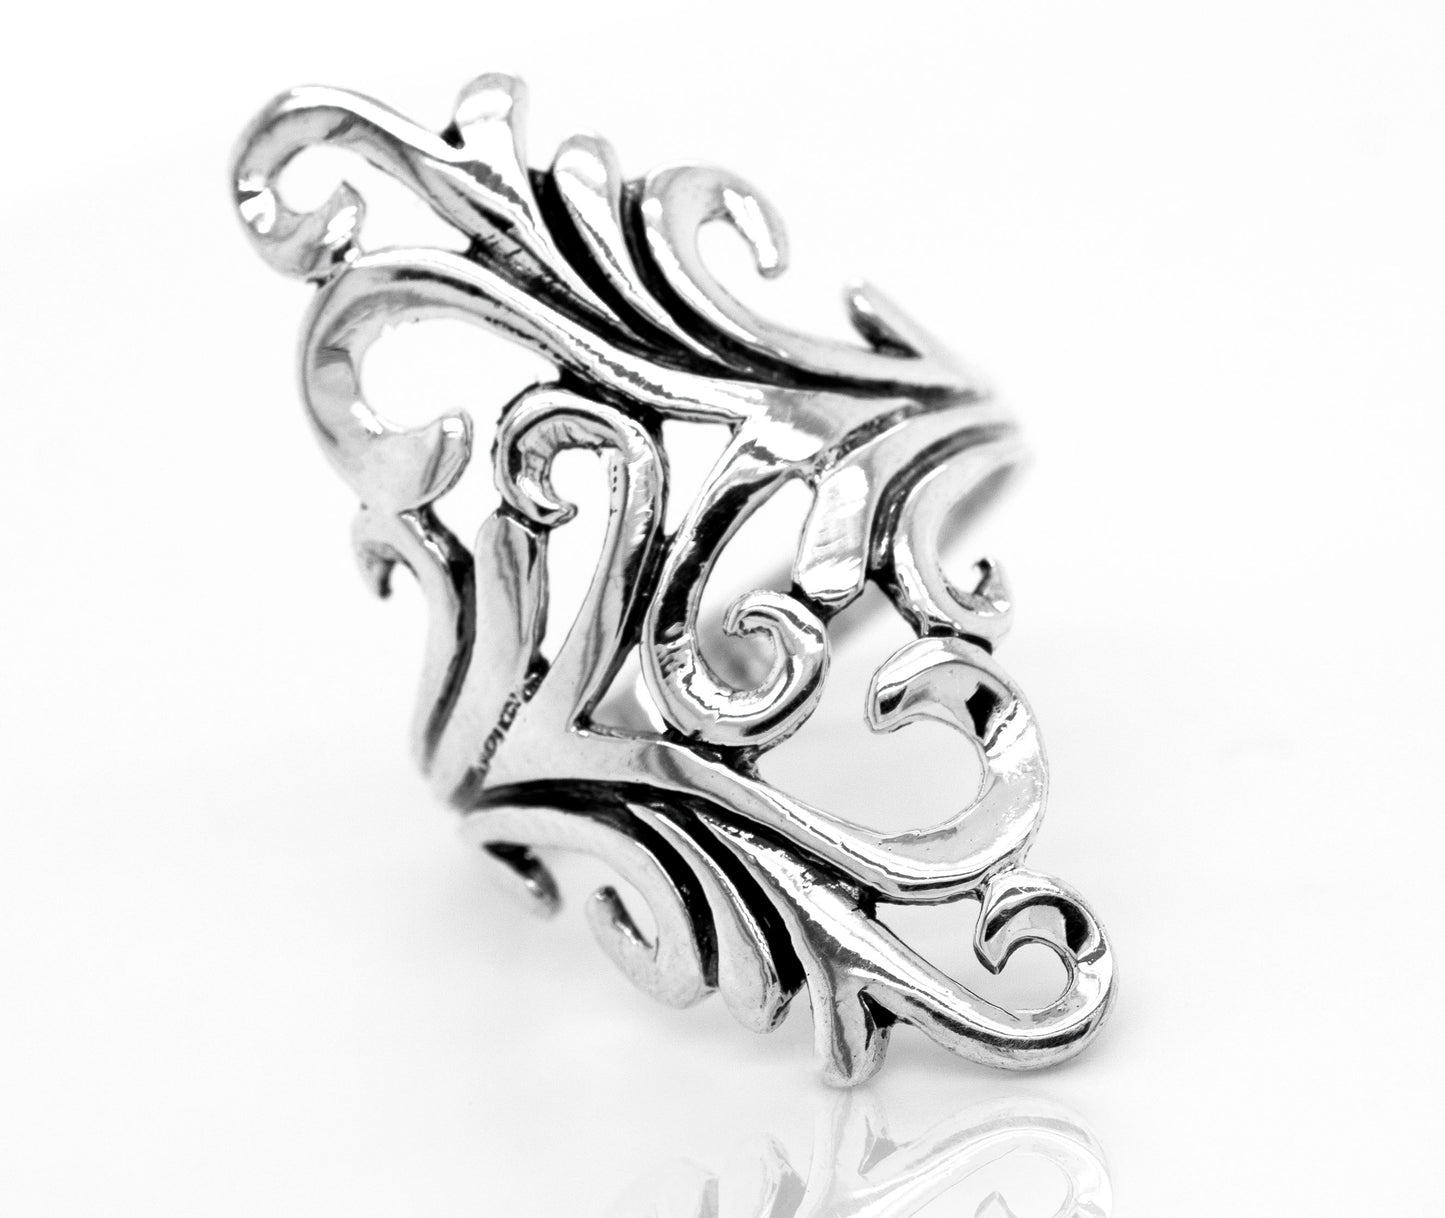 
                  
                    A Freeform Swirl Wrap Ring by Super Silver, made of .925 sterling silver with an ornate filigree design in art nouveau style.
                  
                